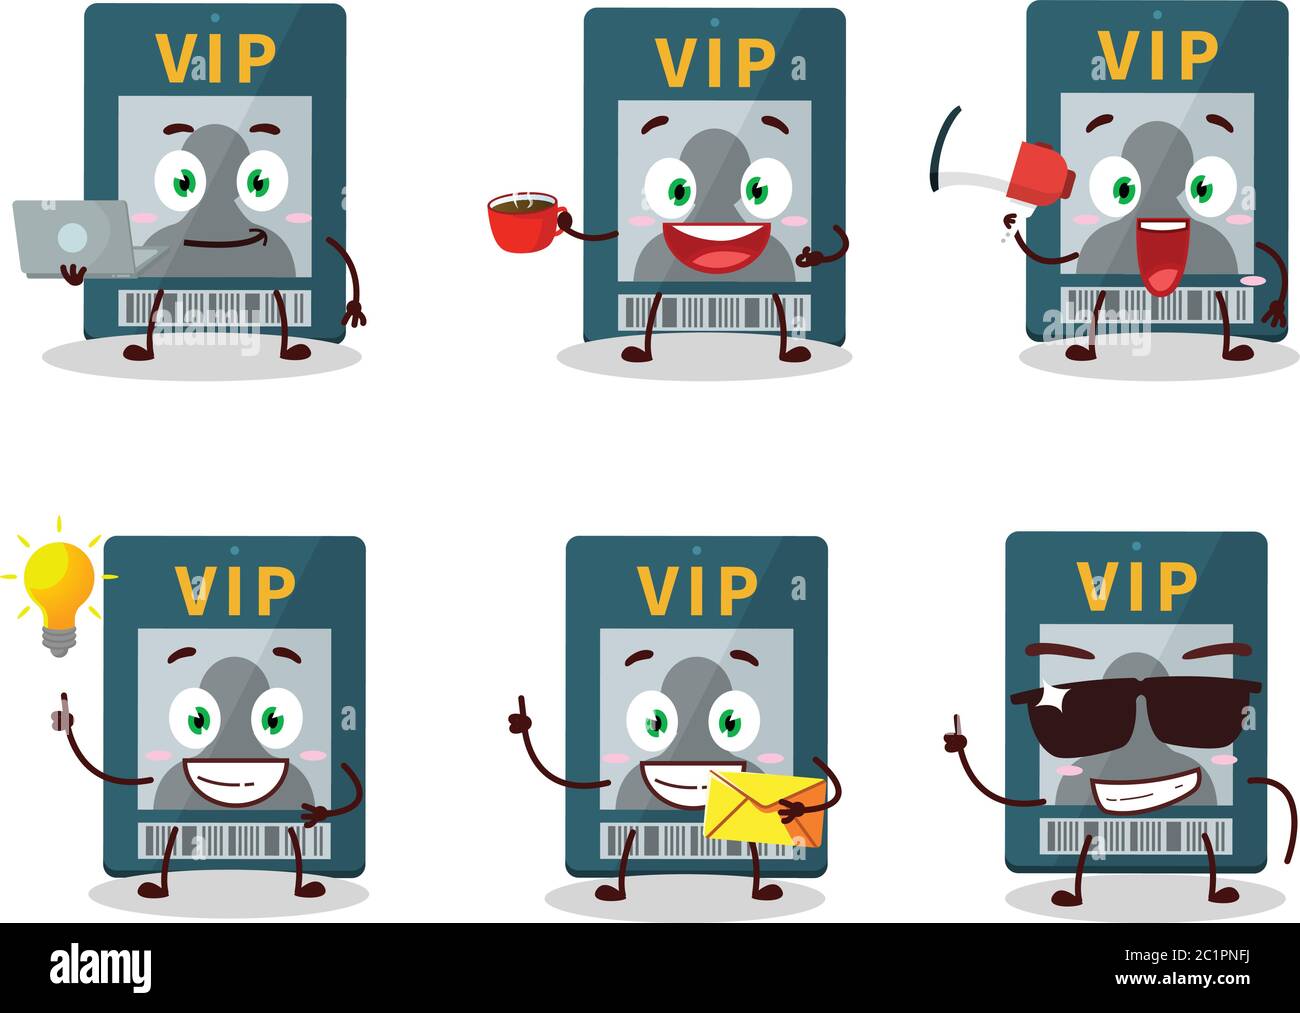 Vip card cartoon character with various types of business emoticons Stock Vector